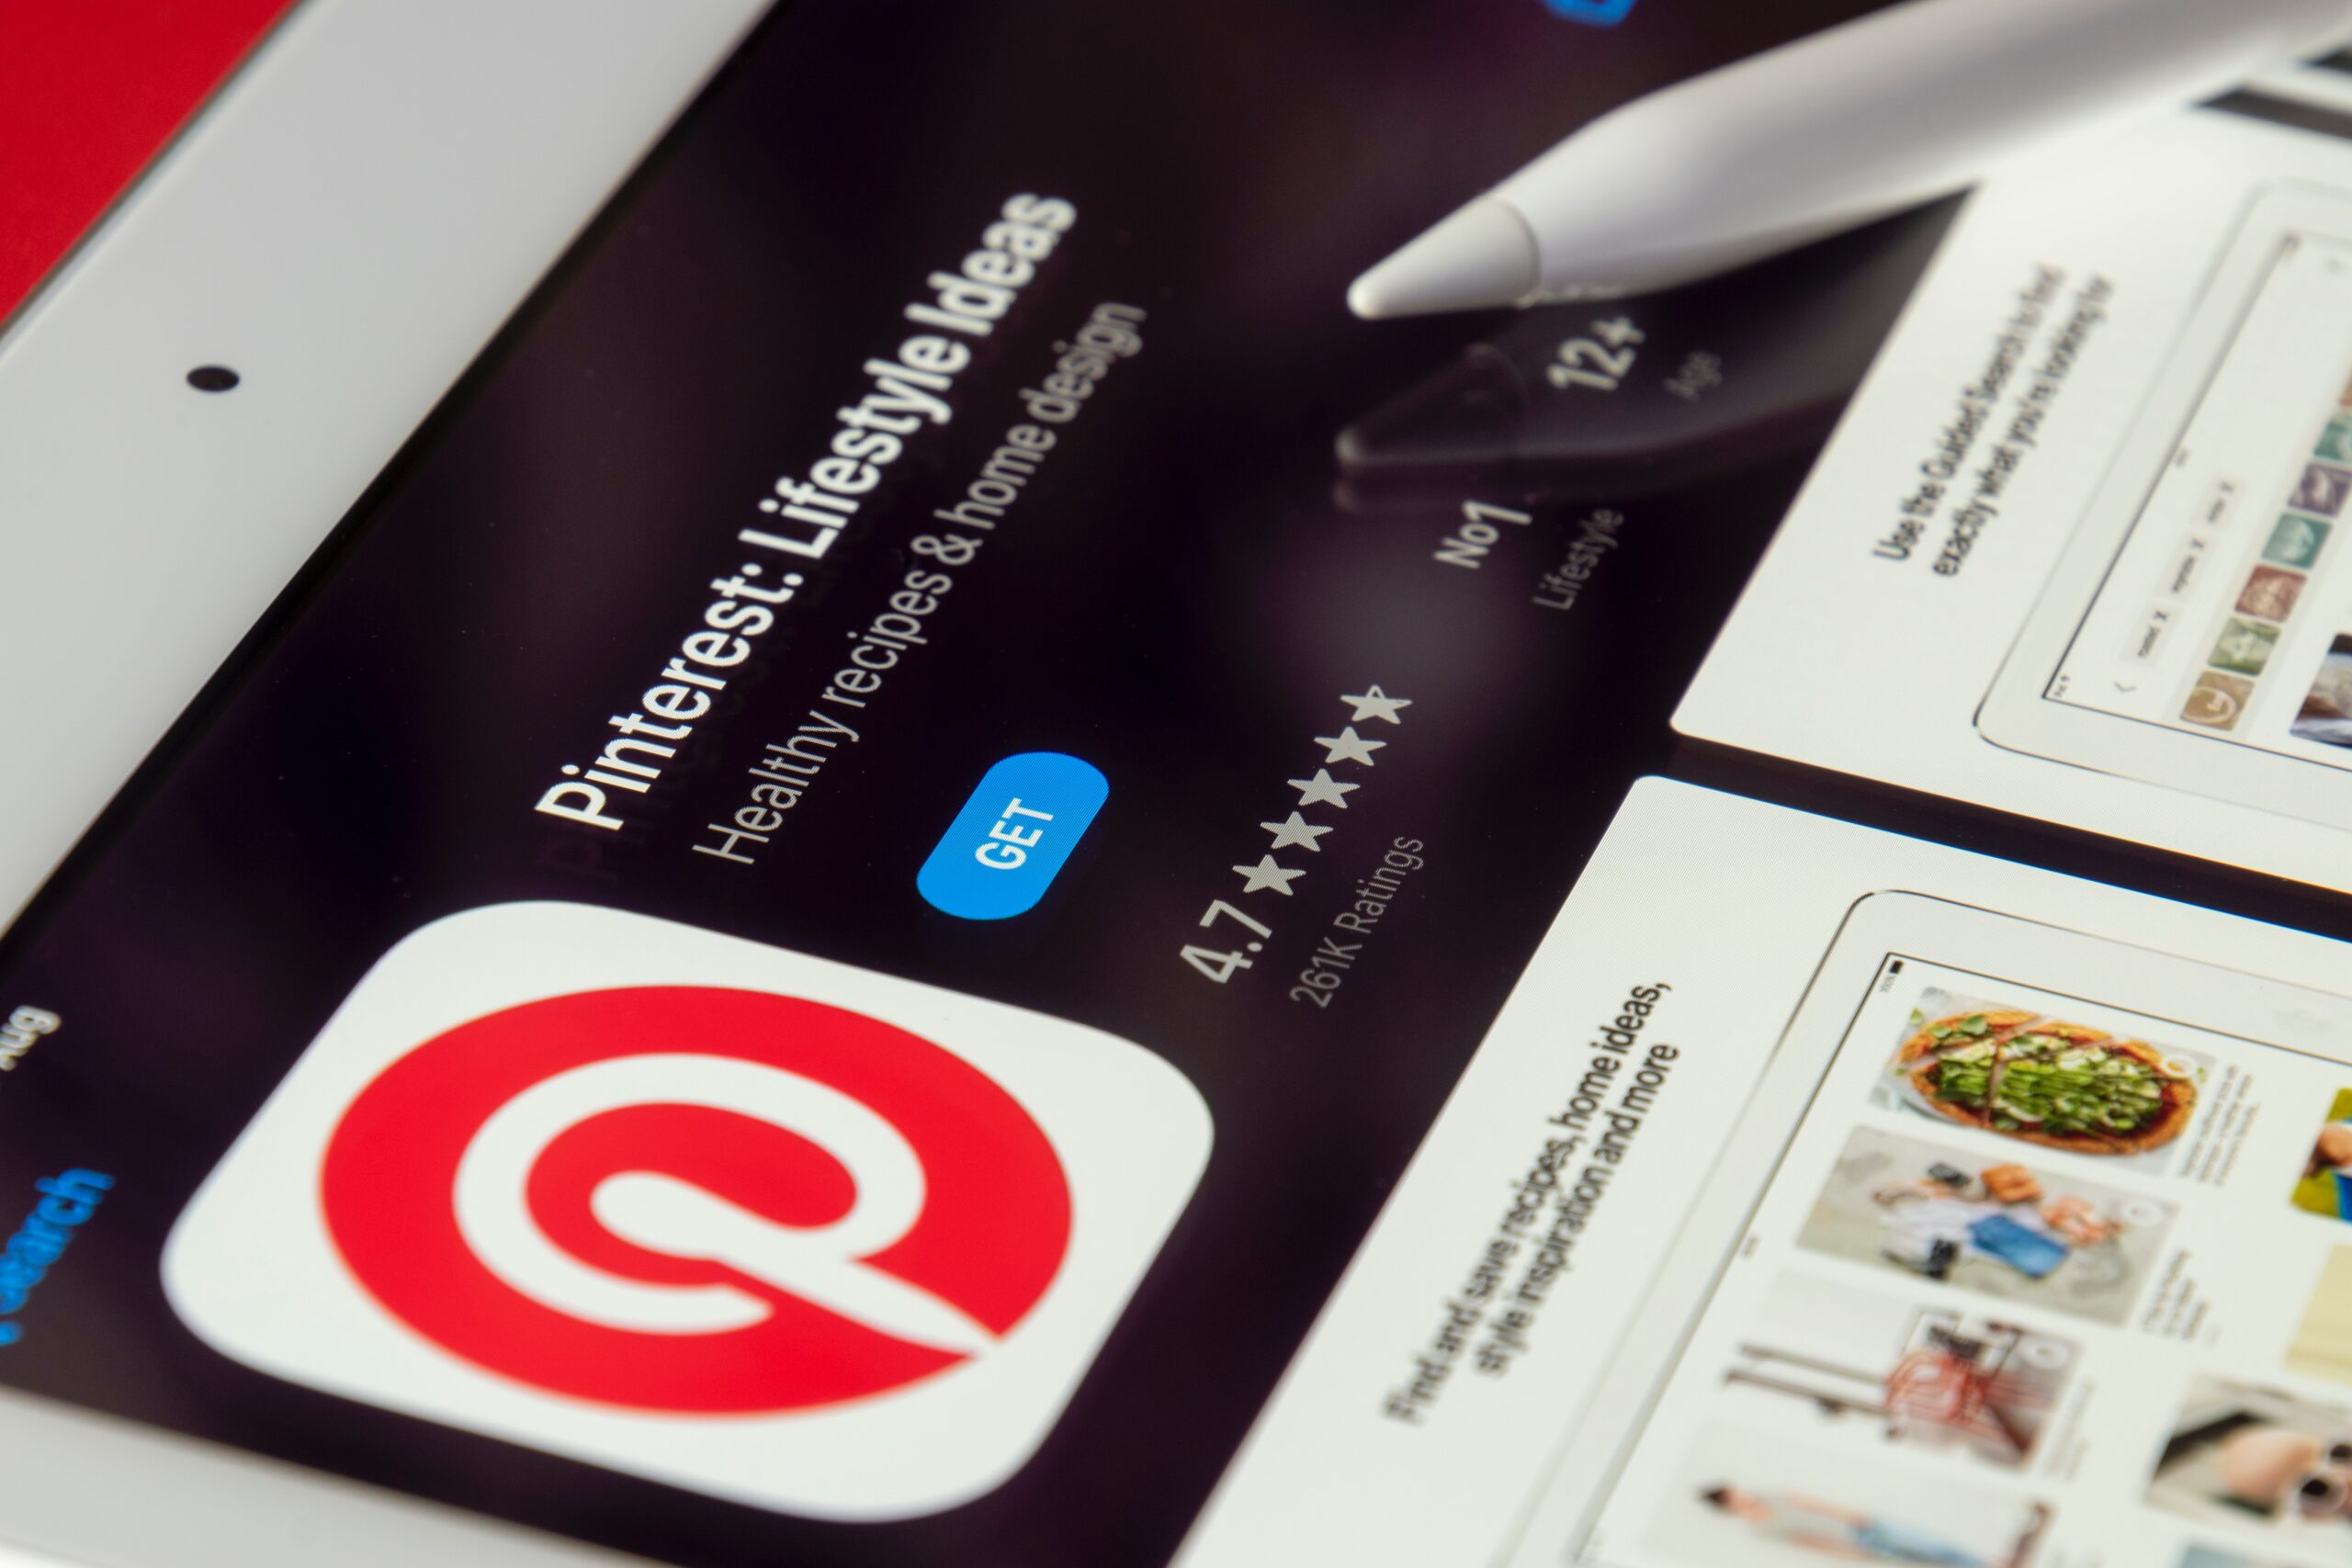 Skyrocket Your Pinterest Popularity by Buying Followers